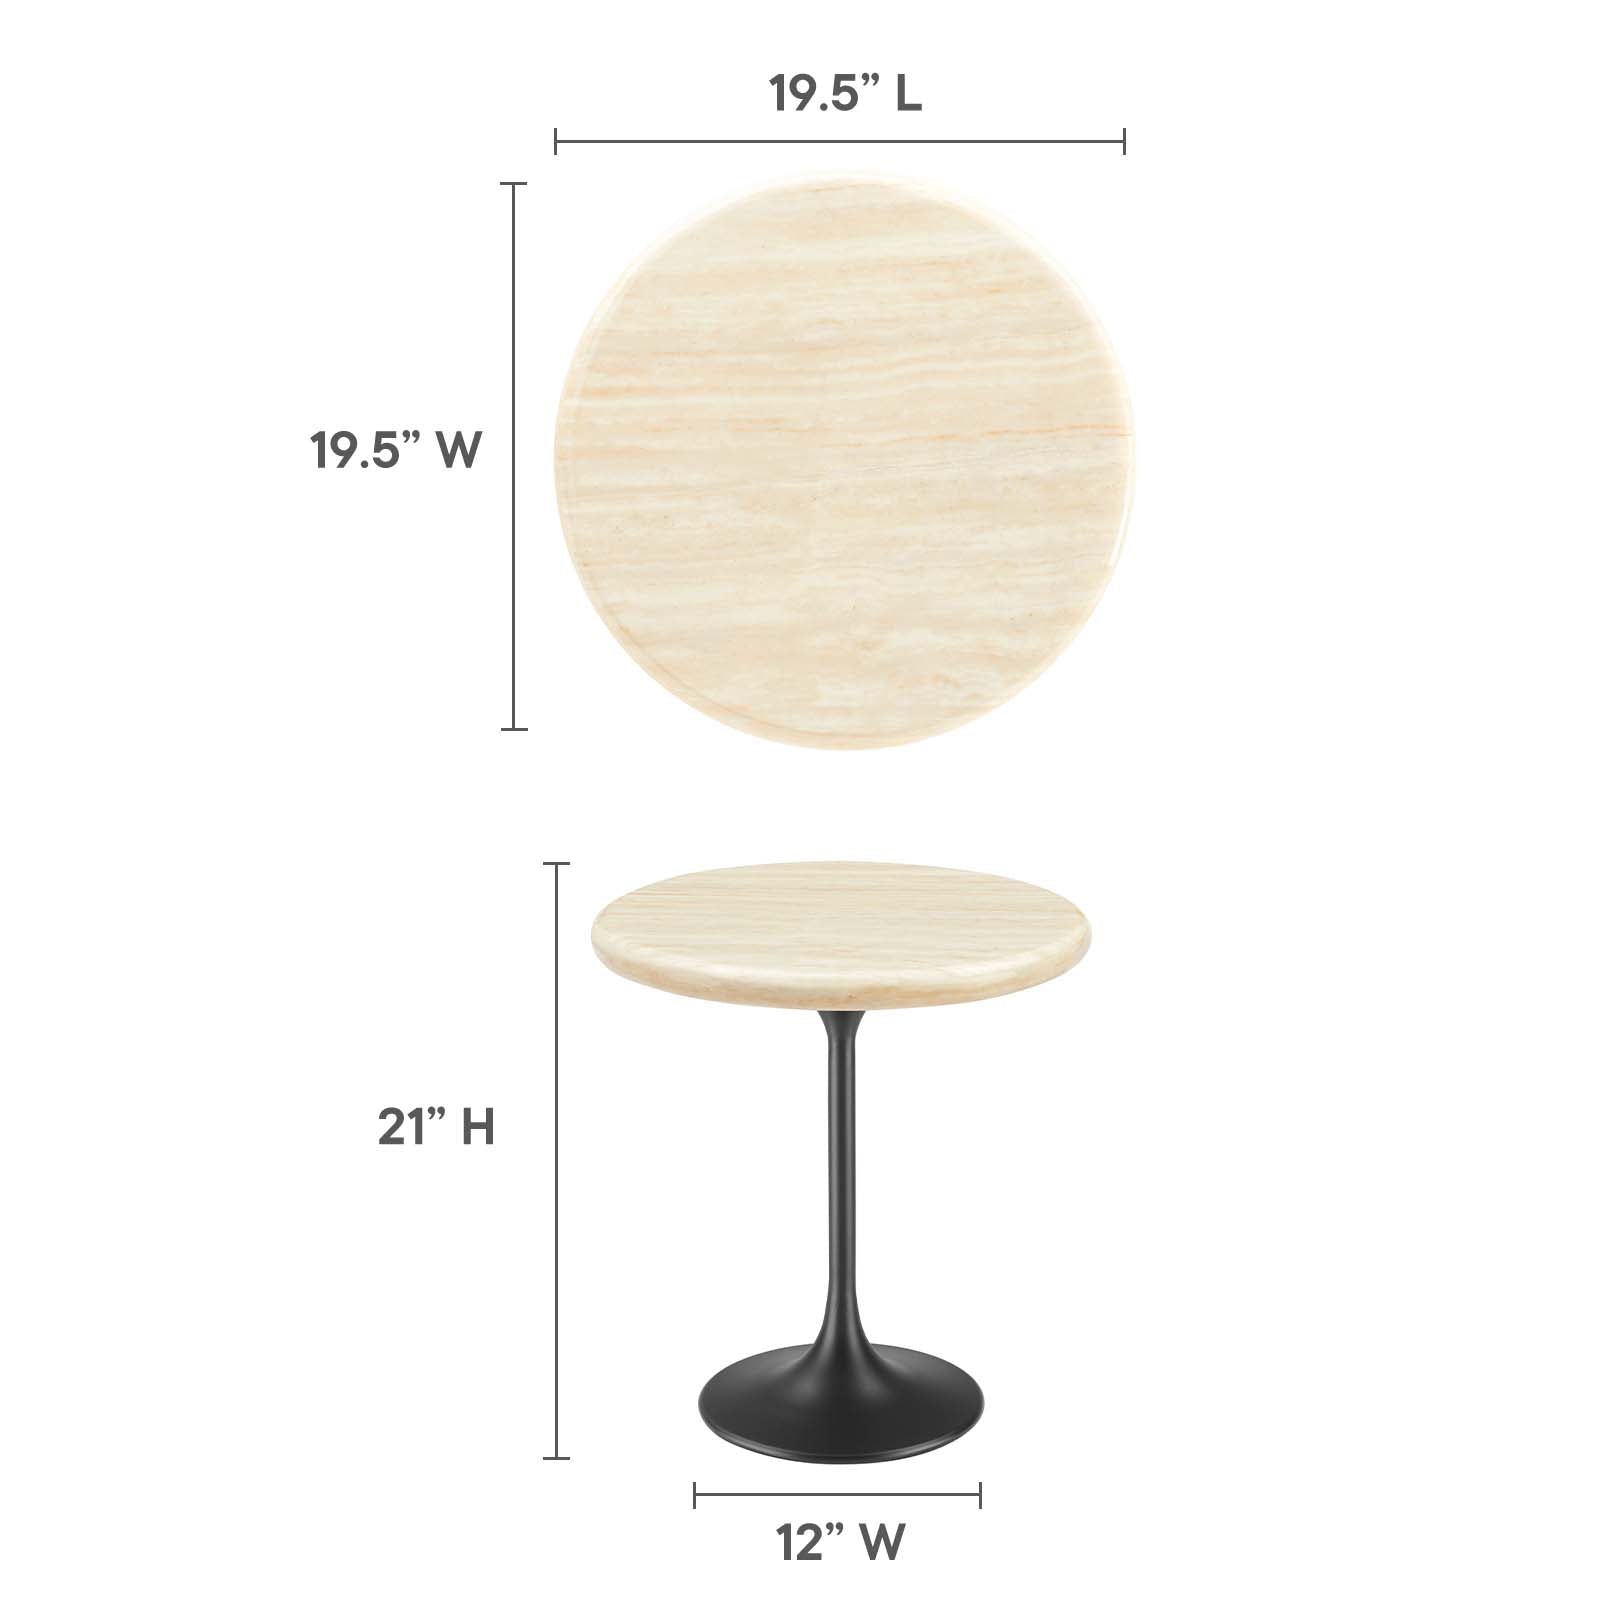 Lippa 20" Round Artificial Travertine Side Table - East Shore Modern Home Furnishings